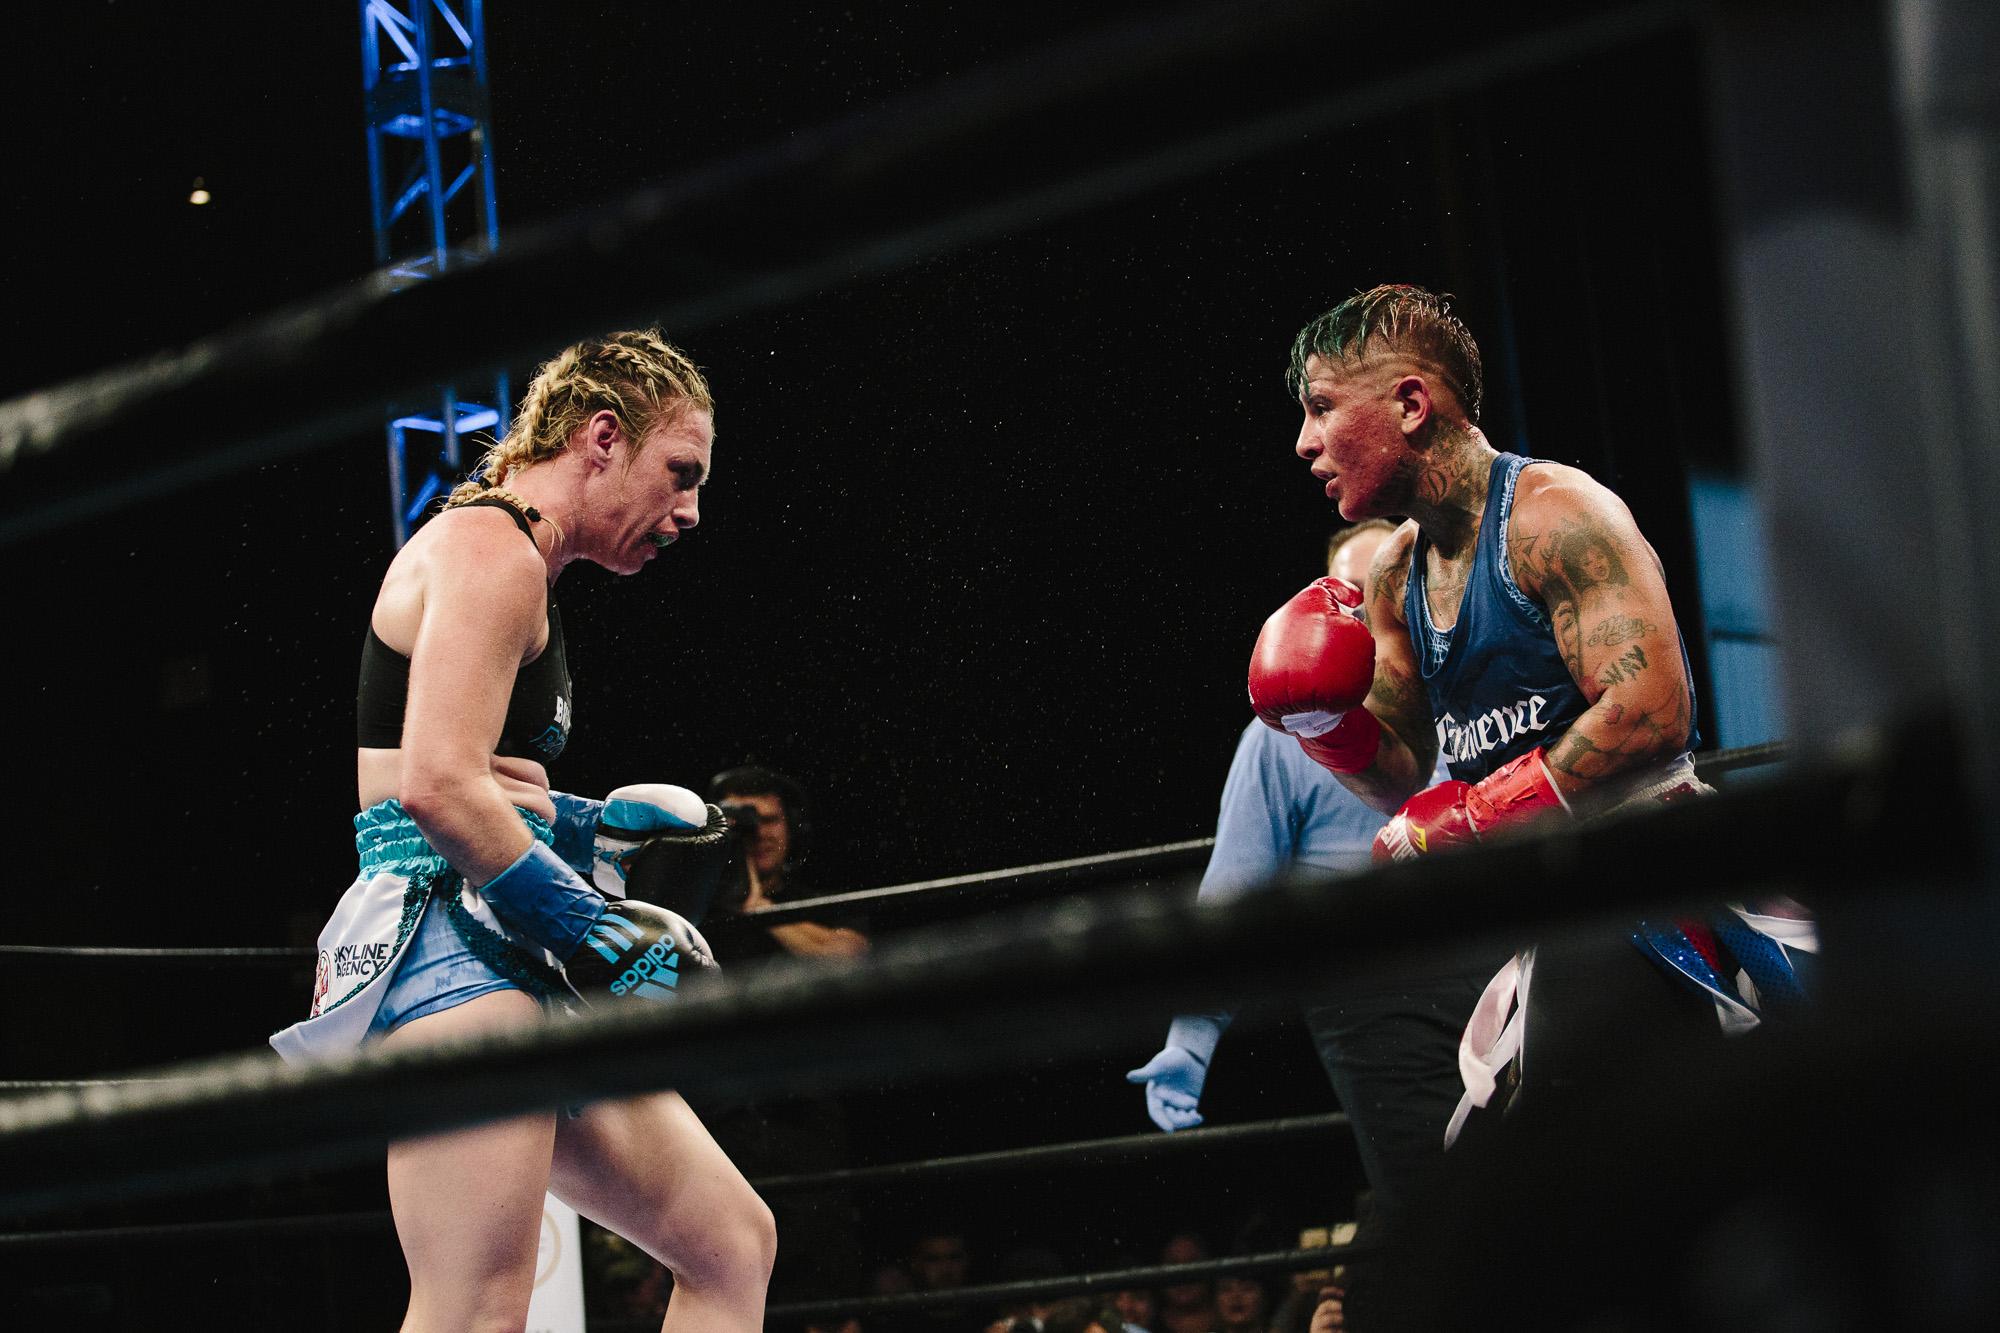 Pound for Pound | ESPN W - Featherweight boxers Heather Hardy and Shelly Vincent...